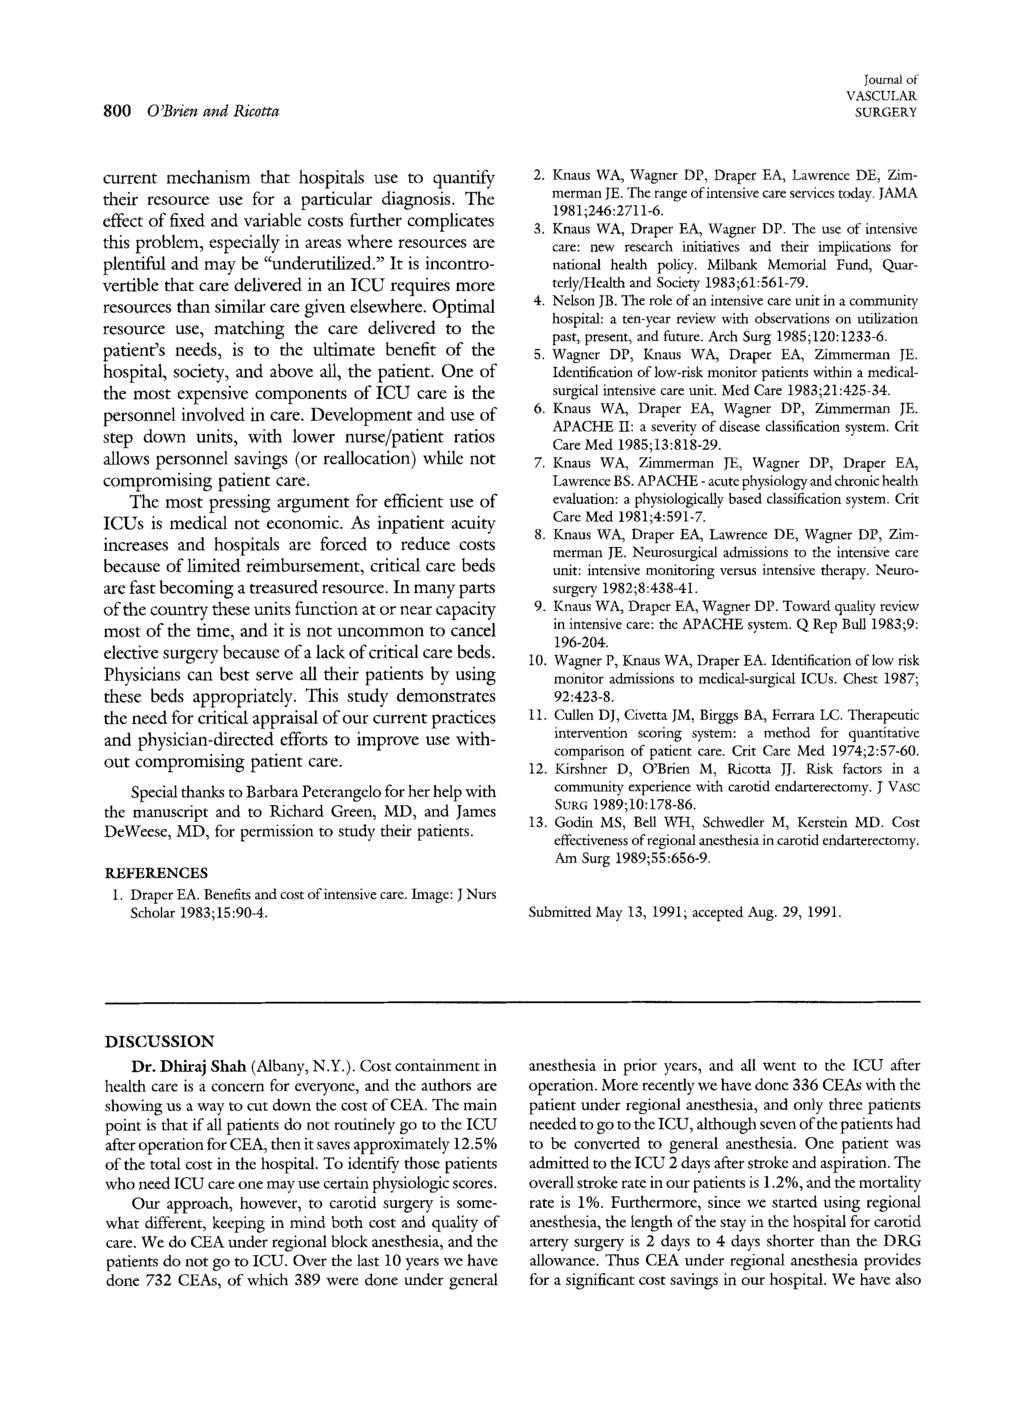 800 O'Brien and Ricotta Journal of VASCULAR SURGERY current mechanism that hospitals use to quantify their resource use for a particular diagnosis.